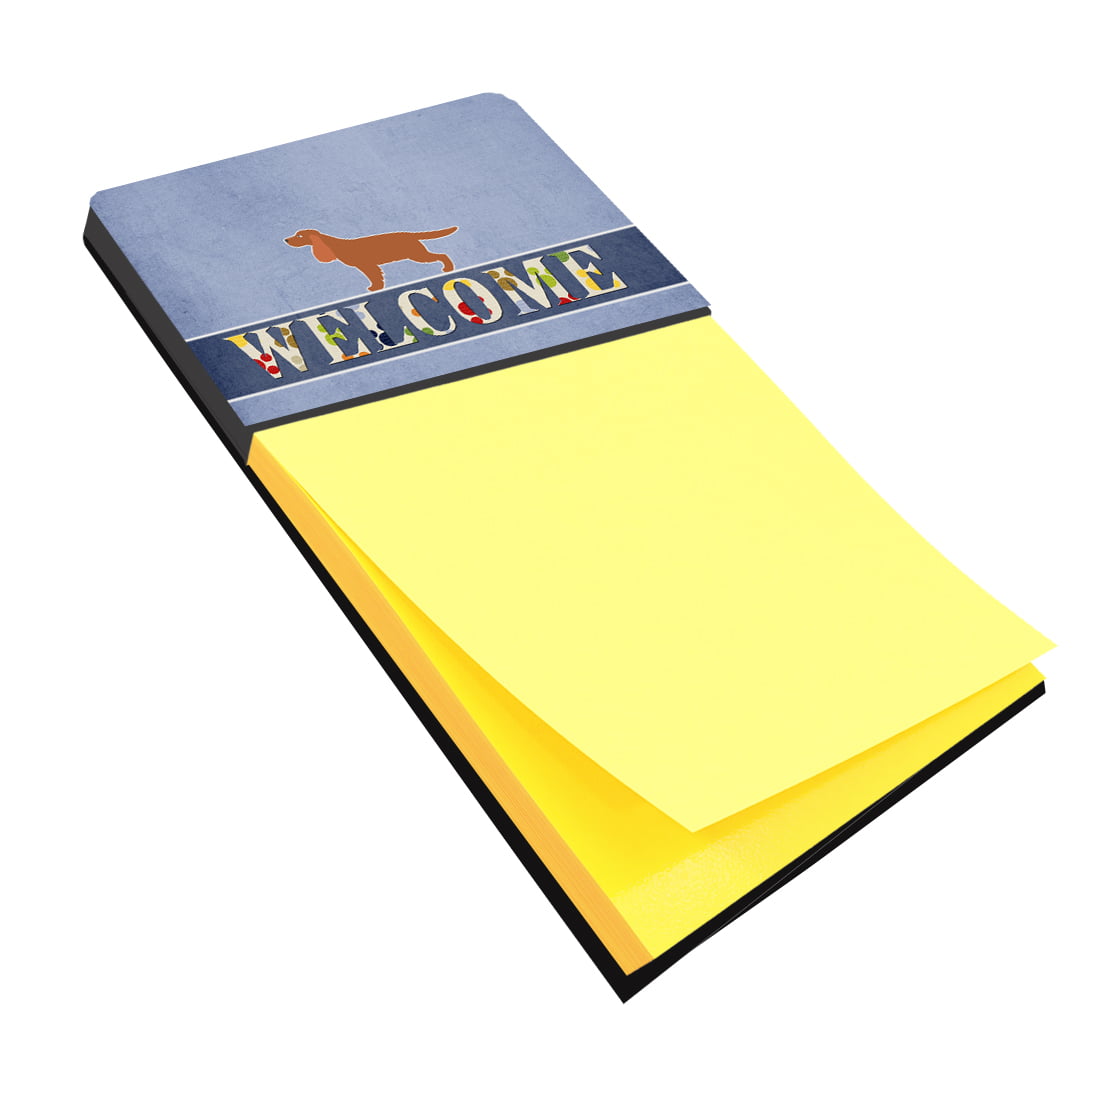 Bb5516sn English Cocker Spaniel Welcome Sticky Note Holder